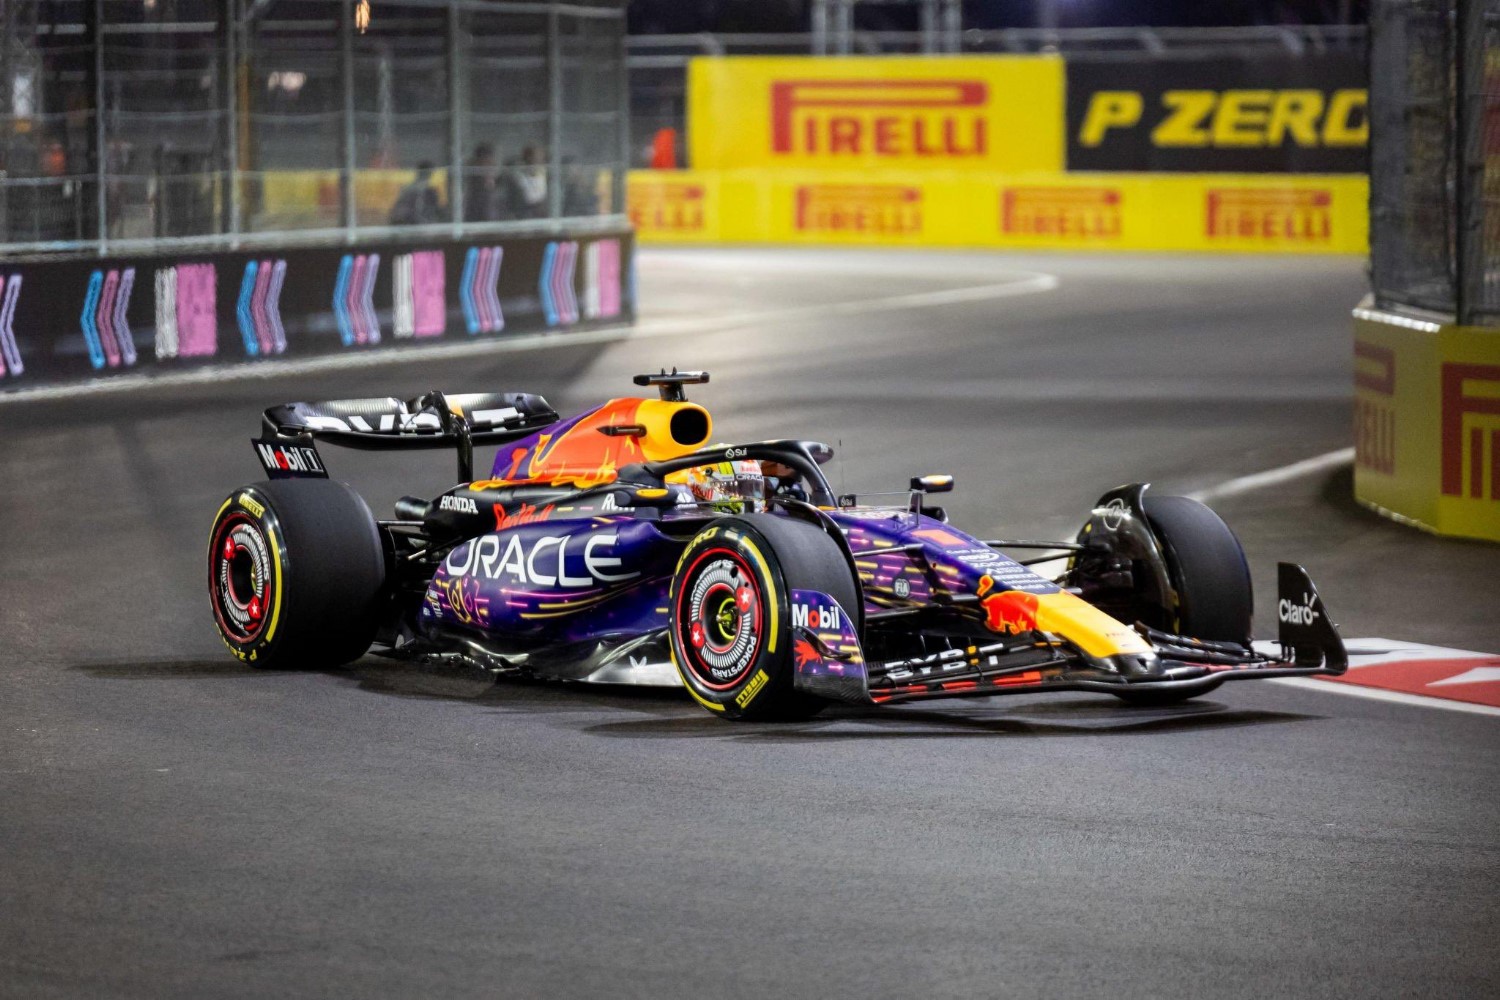 Max Verstappen will start 2nd but look out for the Dutchman in the race